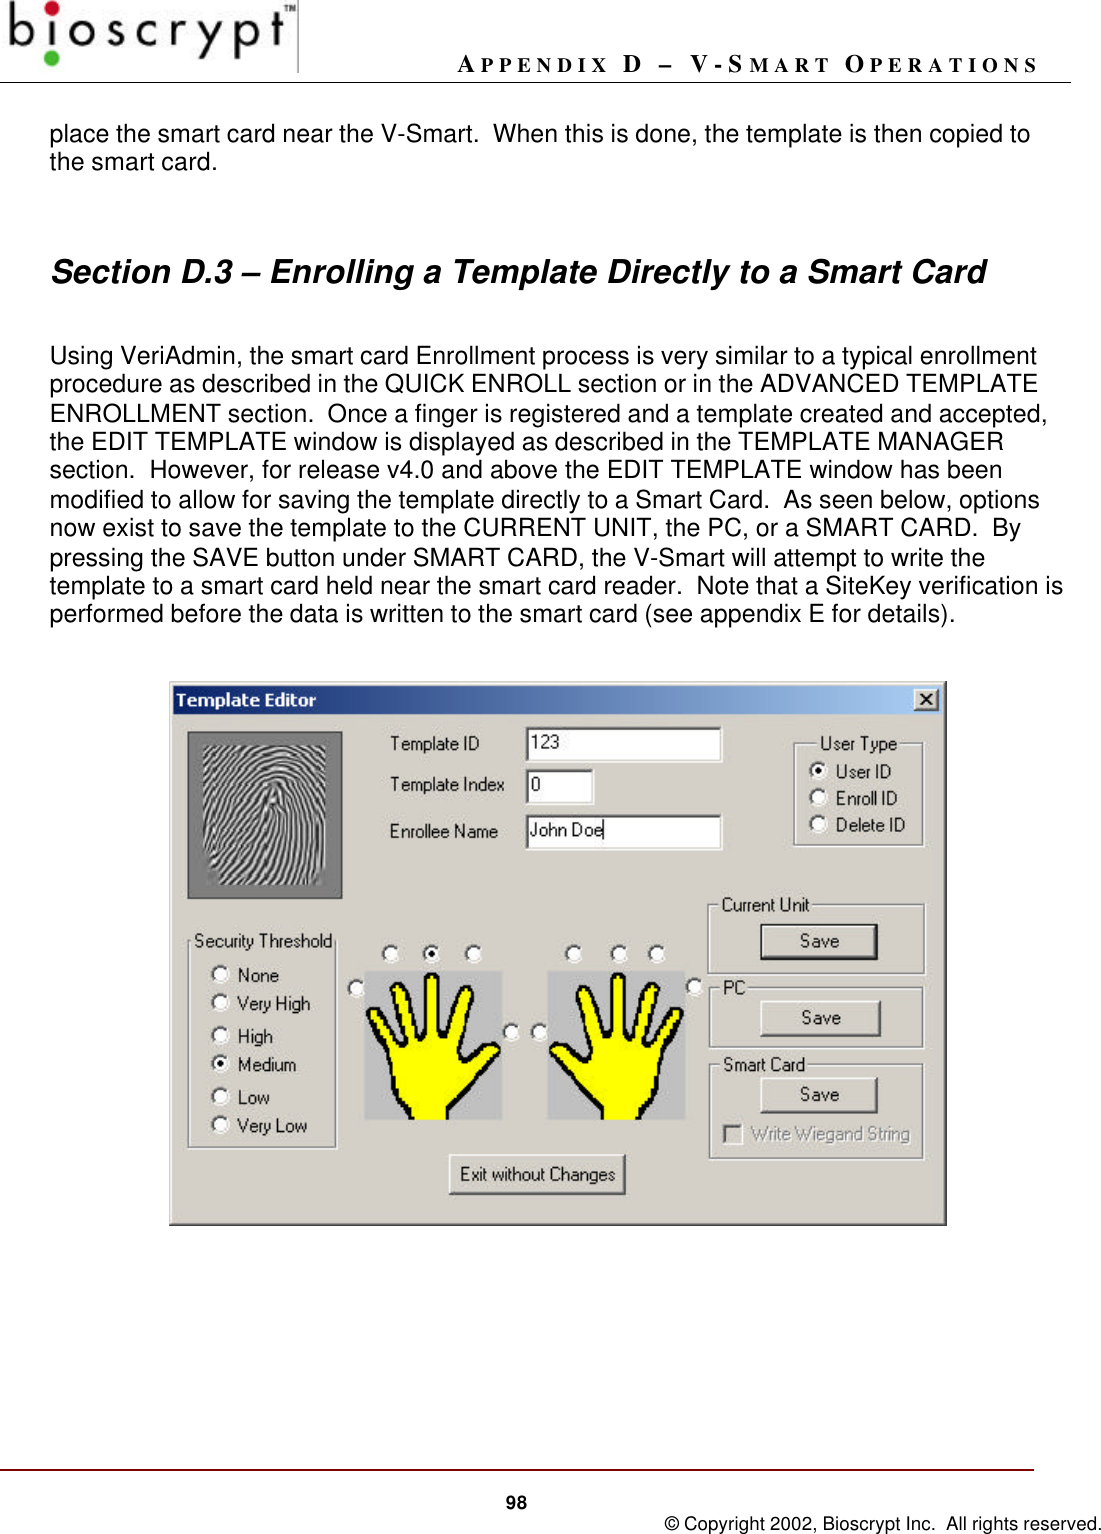 APPENDIX D – V-SMART OPERATIONS98 © Copyright 2002, Bioscrypt Inc.  All rights reserved.place the smart card near the V-Smart.  When this is done, the template is then copied tothe smart card.Section D.3 – Enrolling a Template Directly to a Smart CardUsing VeriAdmin, the smart card Enrollment process is very similar to a typical enrollmentprocedure as described in the QUICK ENROLL section or in the ADVANCED TEMPLATEENROLLMENT section.  Once a finger is registered and a template created and accepted,the EDIT TEMPLATE window is displayed as described in the TEMPLATE MANAGERsection.  However, for release v4.0 and above the EDIT TEMPLATE window has beenmodified to allow for saving the template directly to a Smart Card.  As seen below, optionsnow exist to save the template to the CURRENT UNIT, the PC, or a SMART CARD.  Bypressing the SAVE button under SMART CARD, the V-Smart will attempt to write thetemplate to a smart card held near the smart card reader.  Note that a SiteKey verification isperformed before the data is written to the smart card (see appendix E for details).